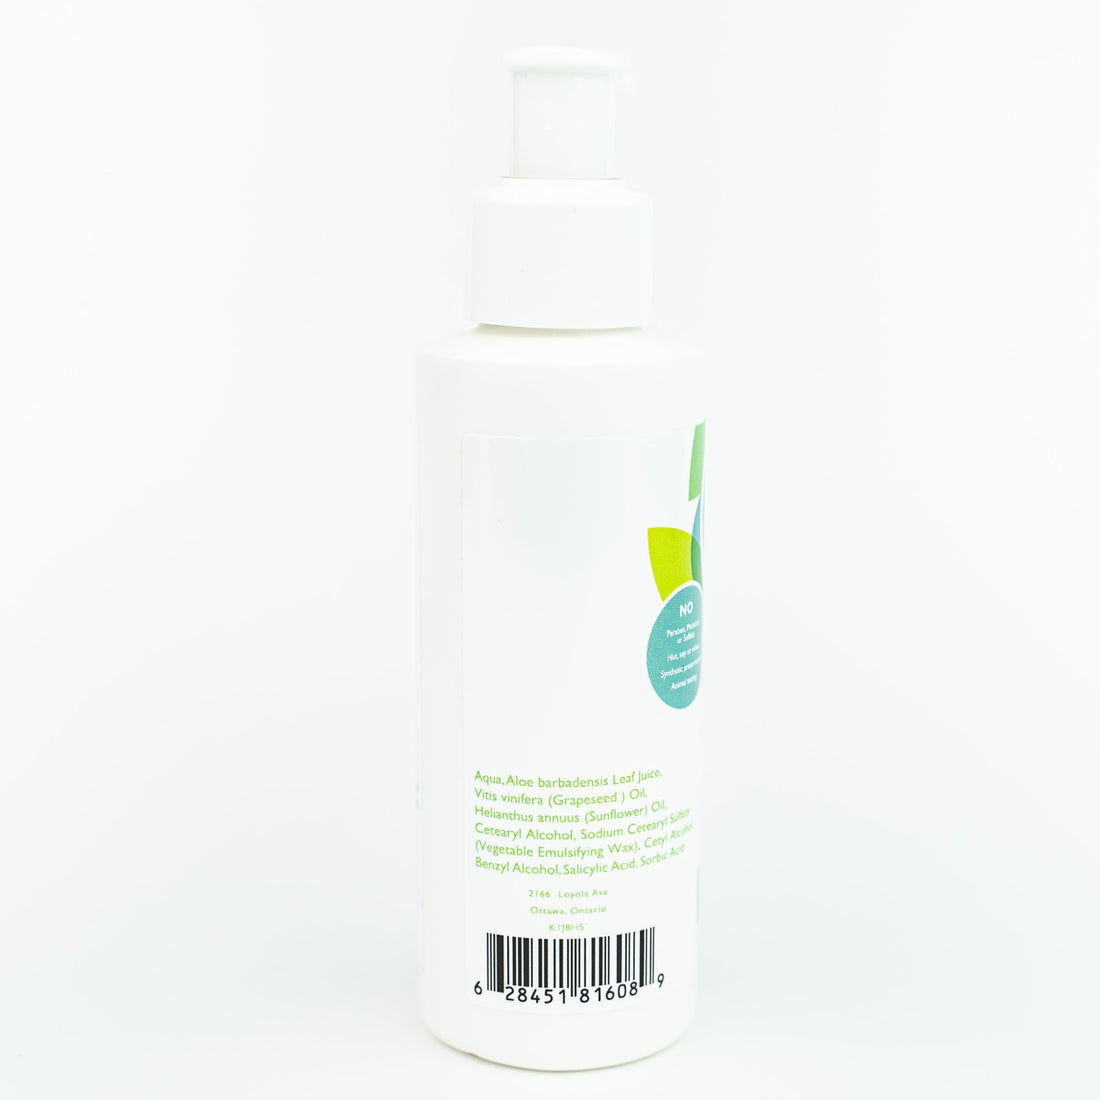 All natural skincare ingredients are listed on the side of a bottle of non toxic hand lotion